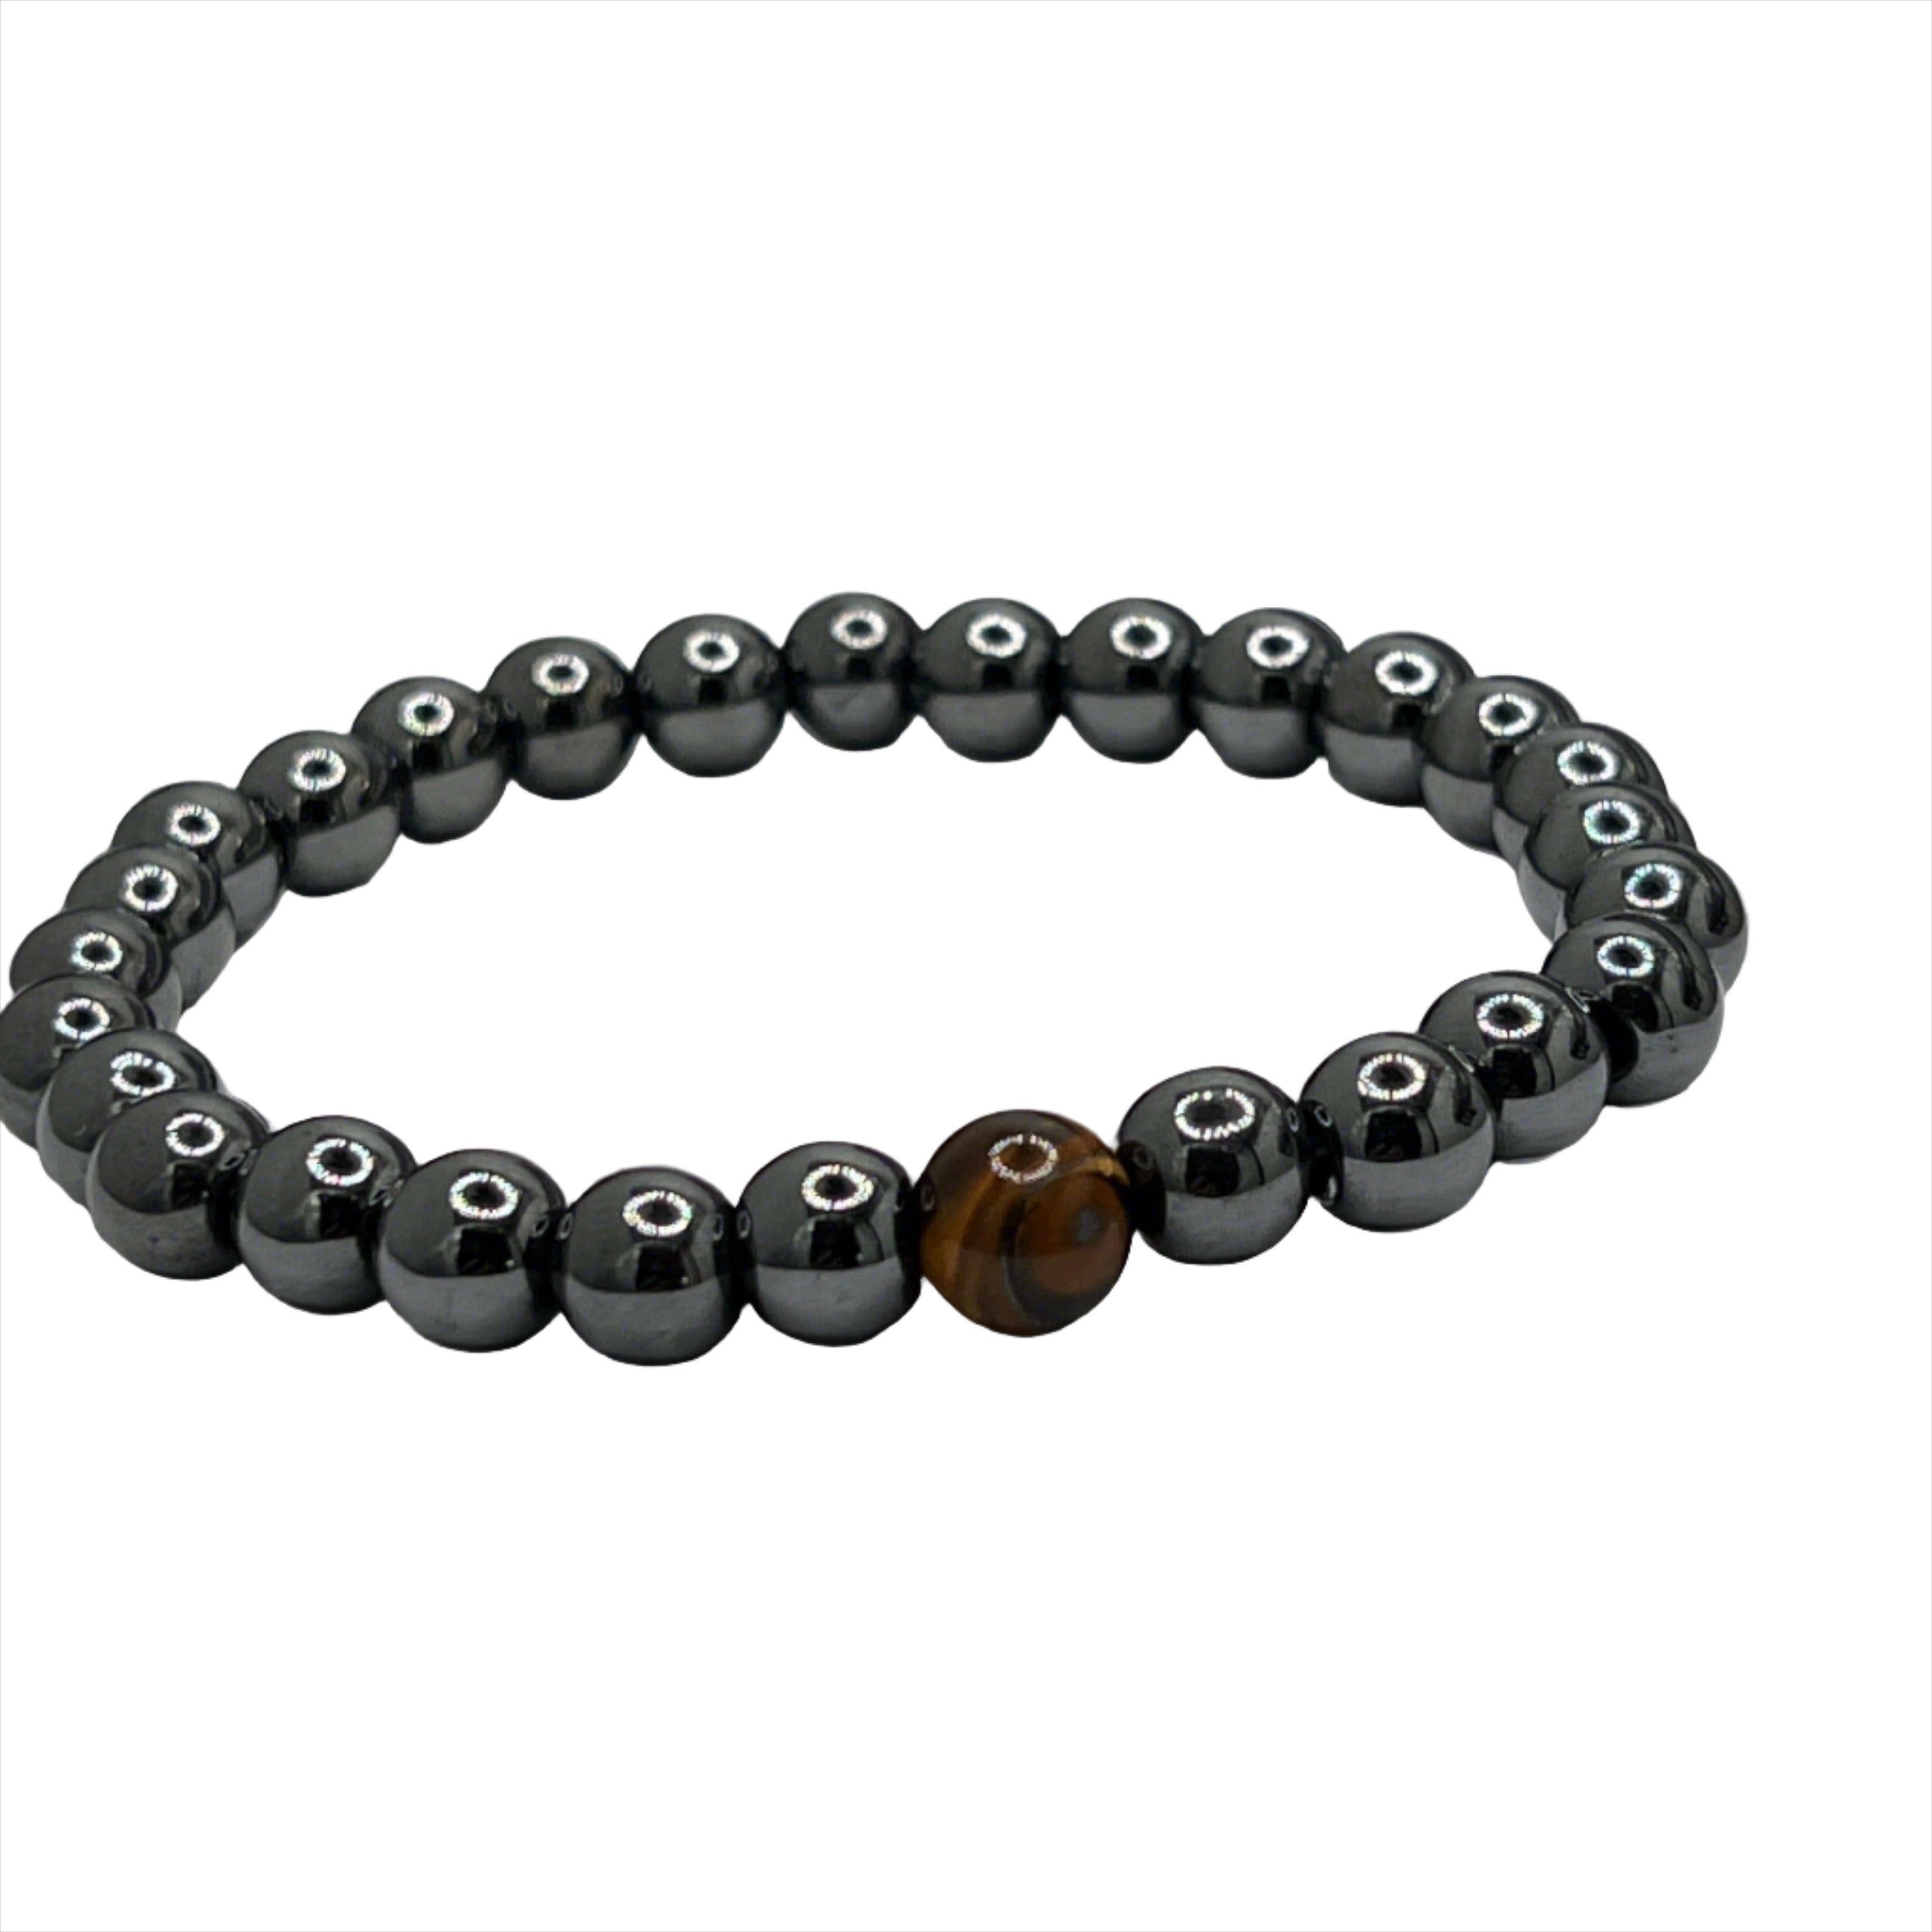 Handcrafted hematite bracelet for healing and protection.